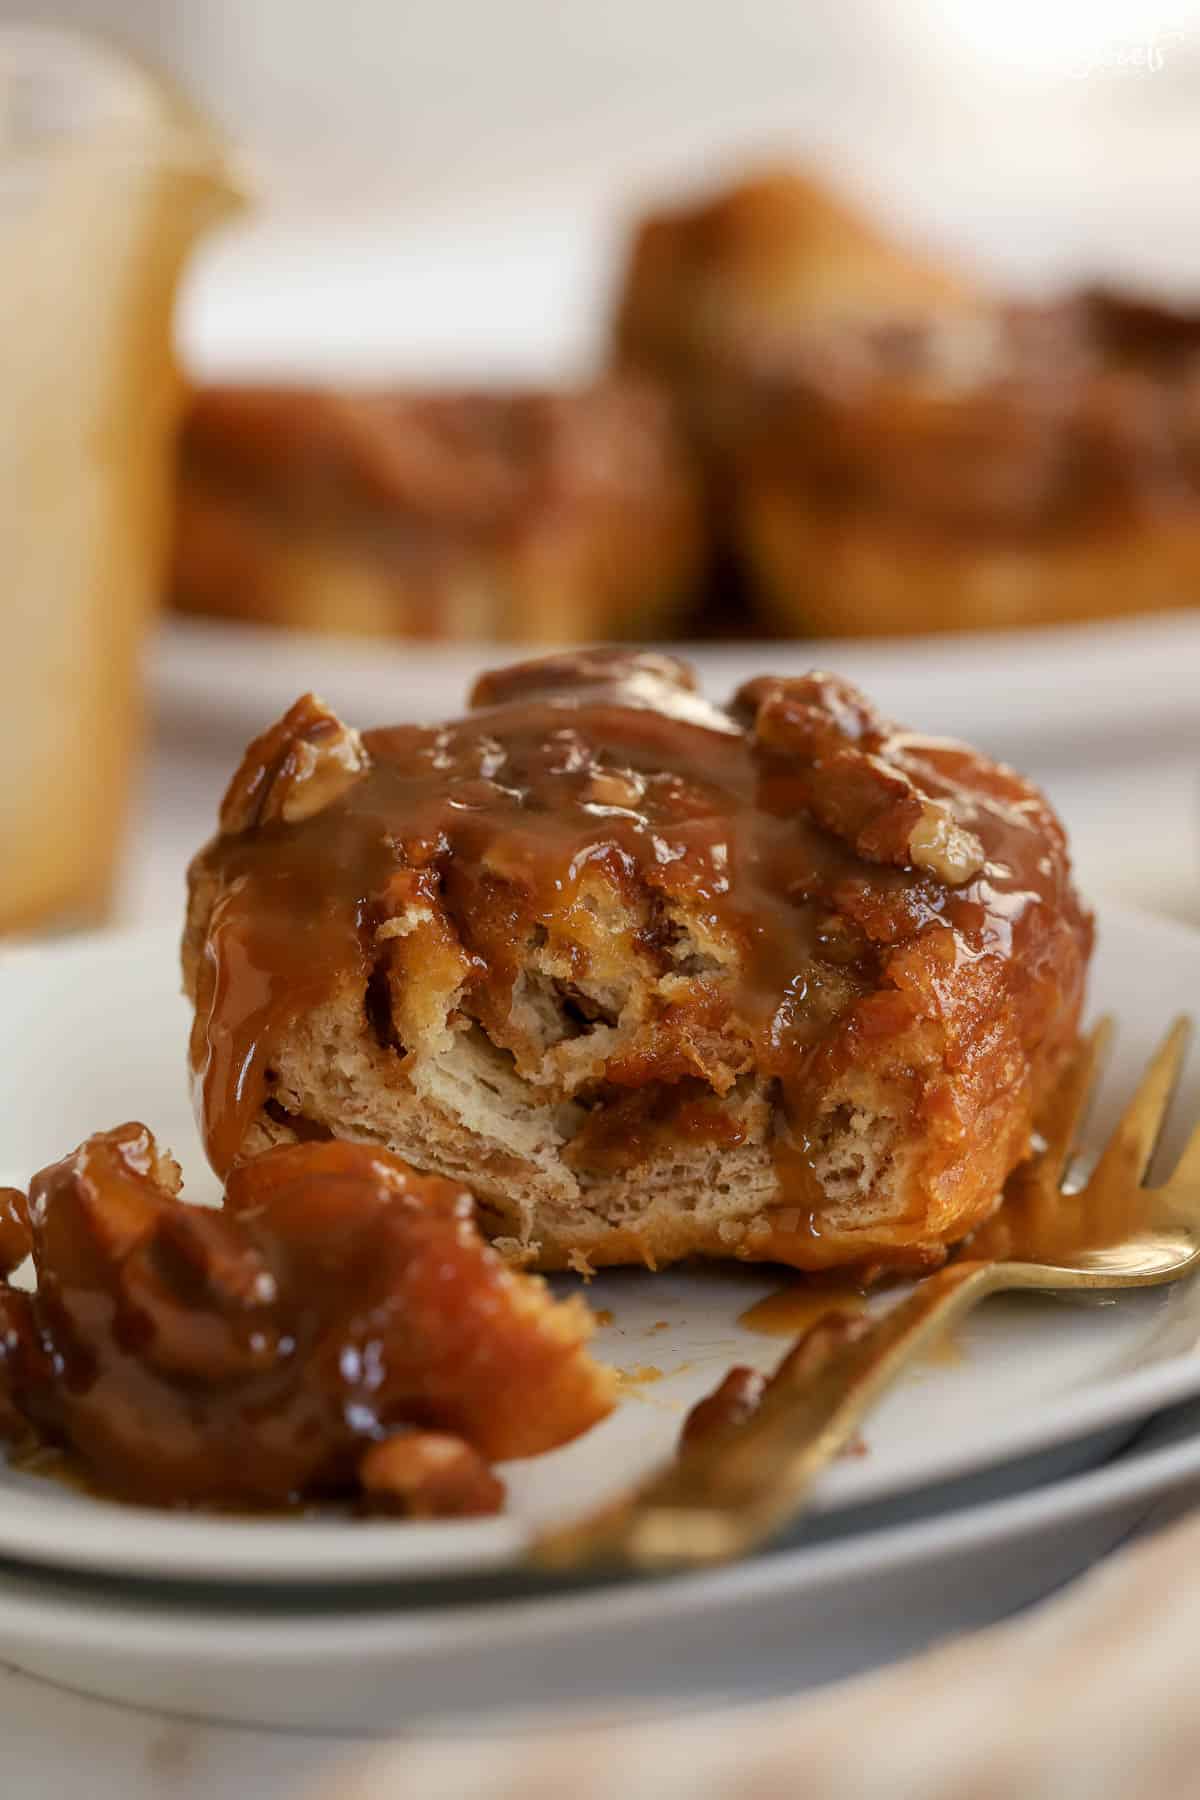 Sticky bun cut open on a white plate with a gold fork.